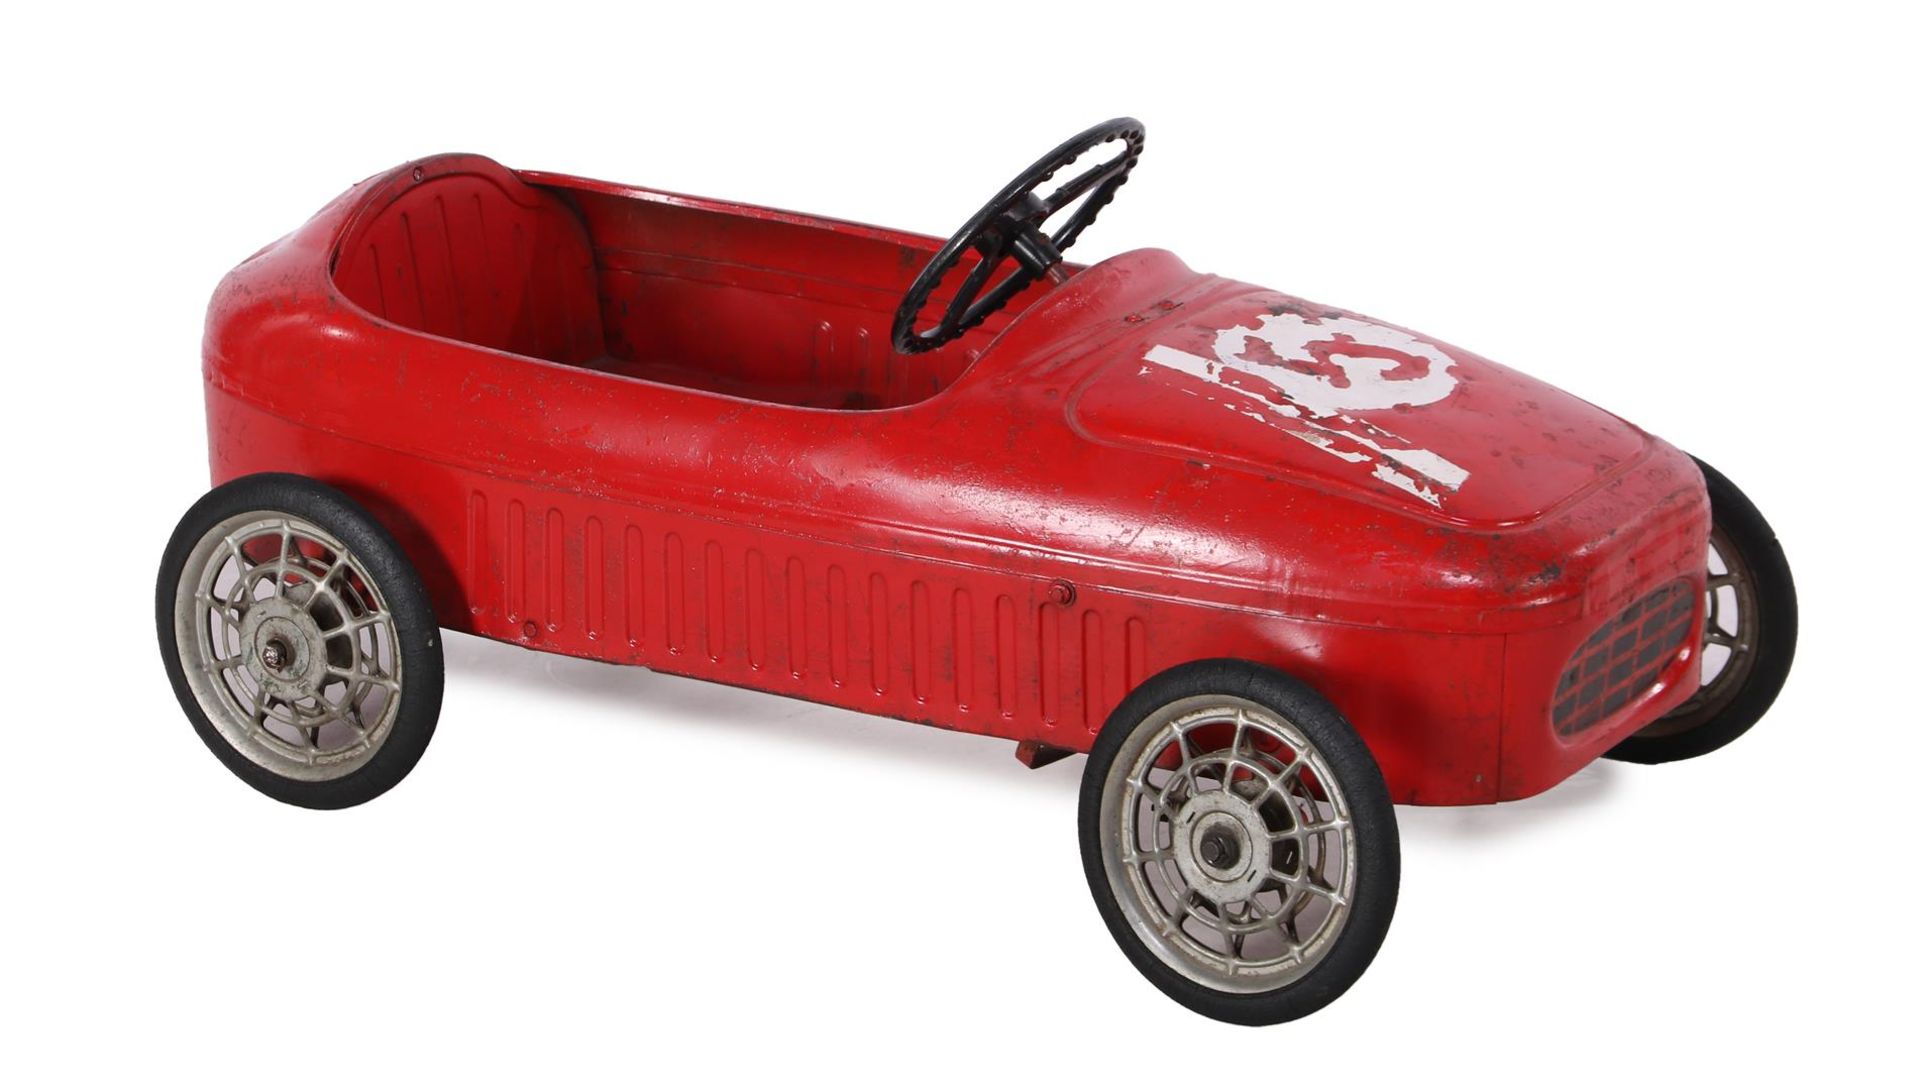 Red pedal car